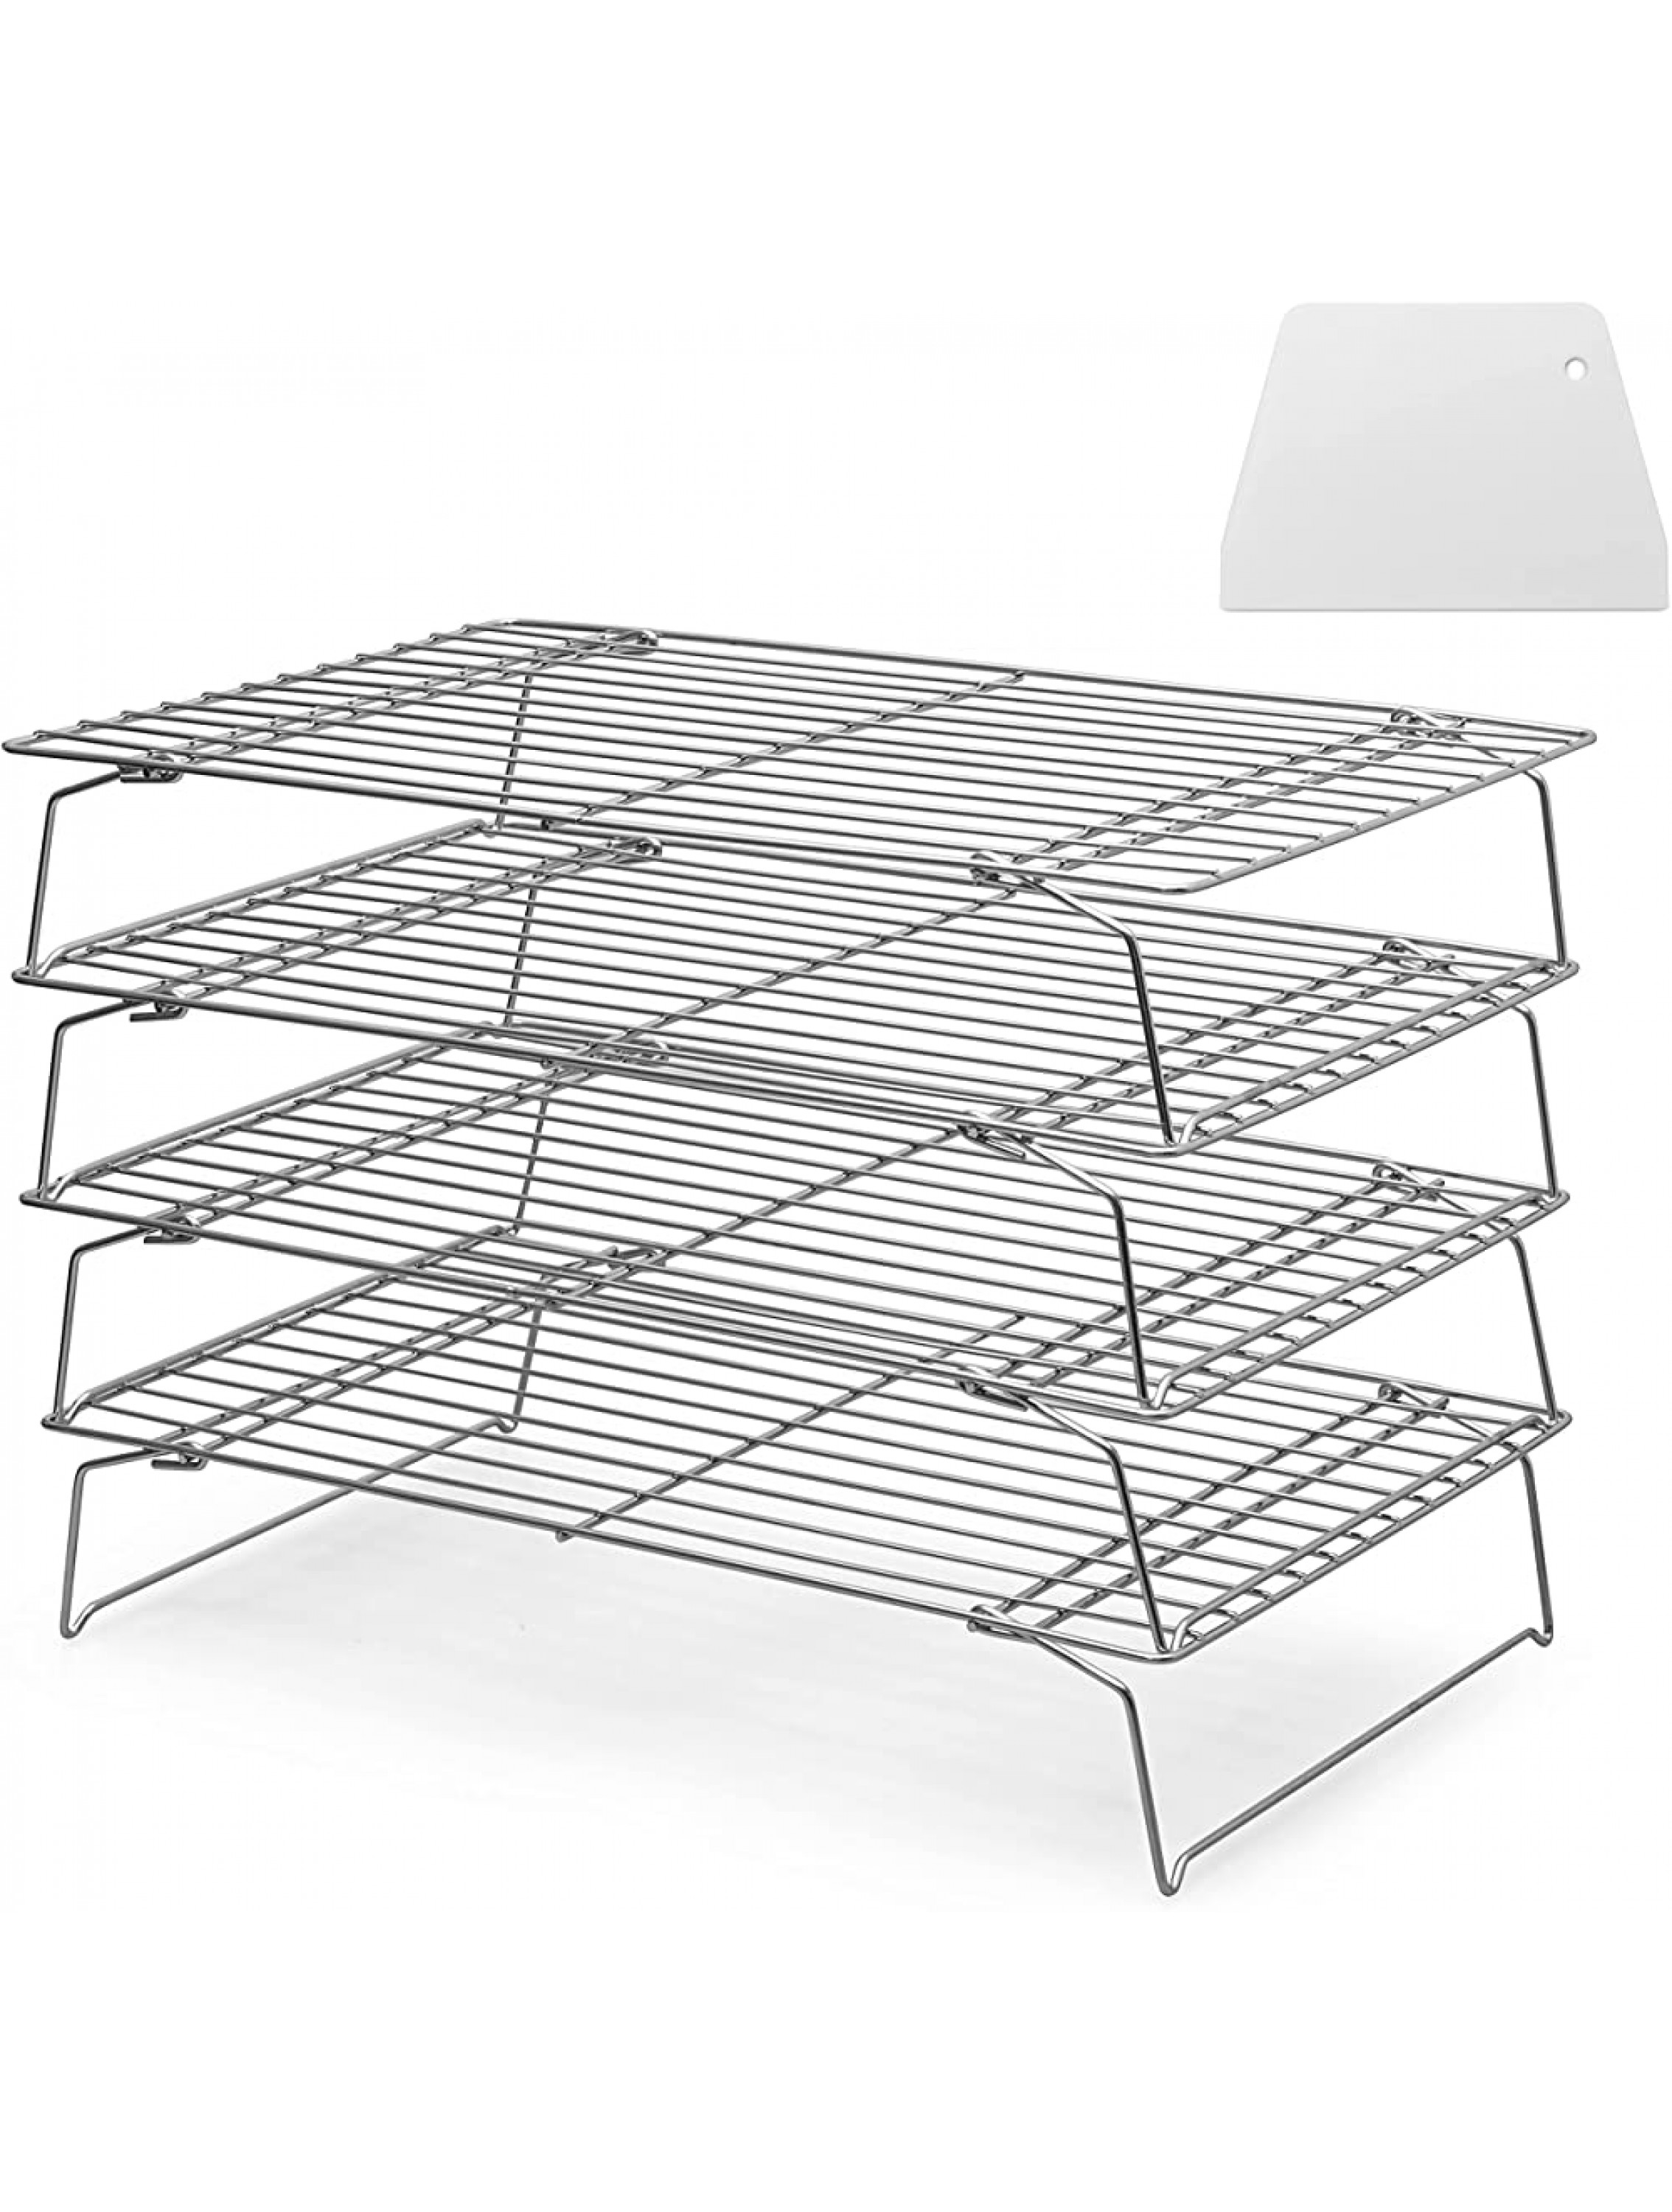 TIMIFI 4 Tier Cooling Rack Stackable 100% Pure Stainless Steel Cooling Racks Can be Used Individually or in Combination Great Essential in the Kitchen Complete with a Dough Scraper - BZWT78CM6